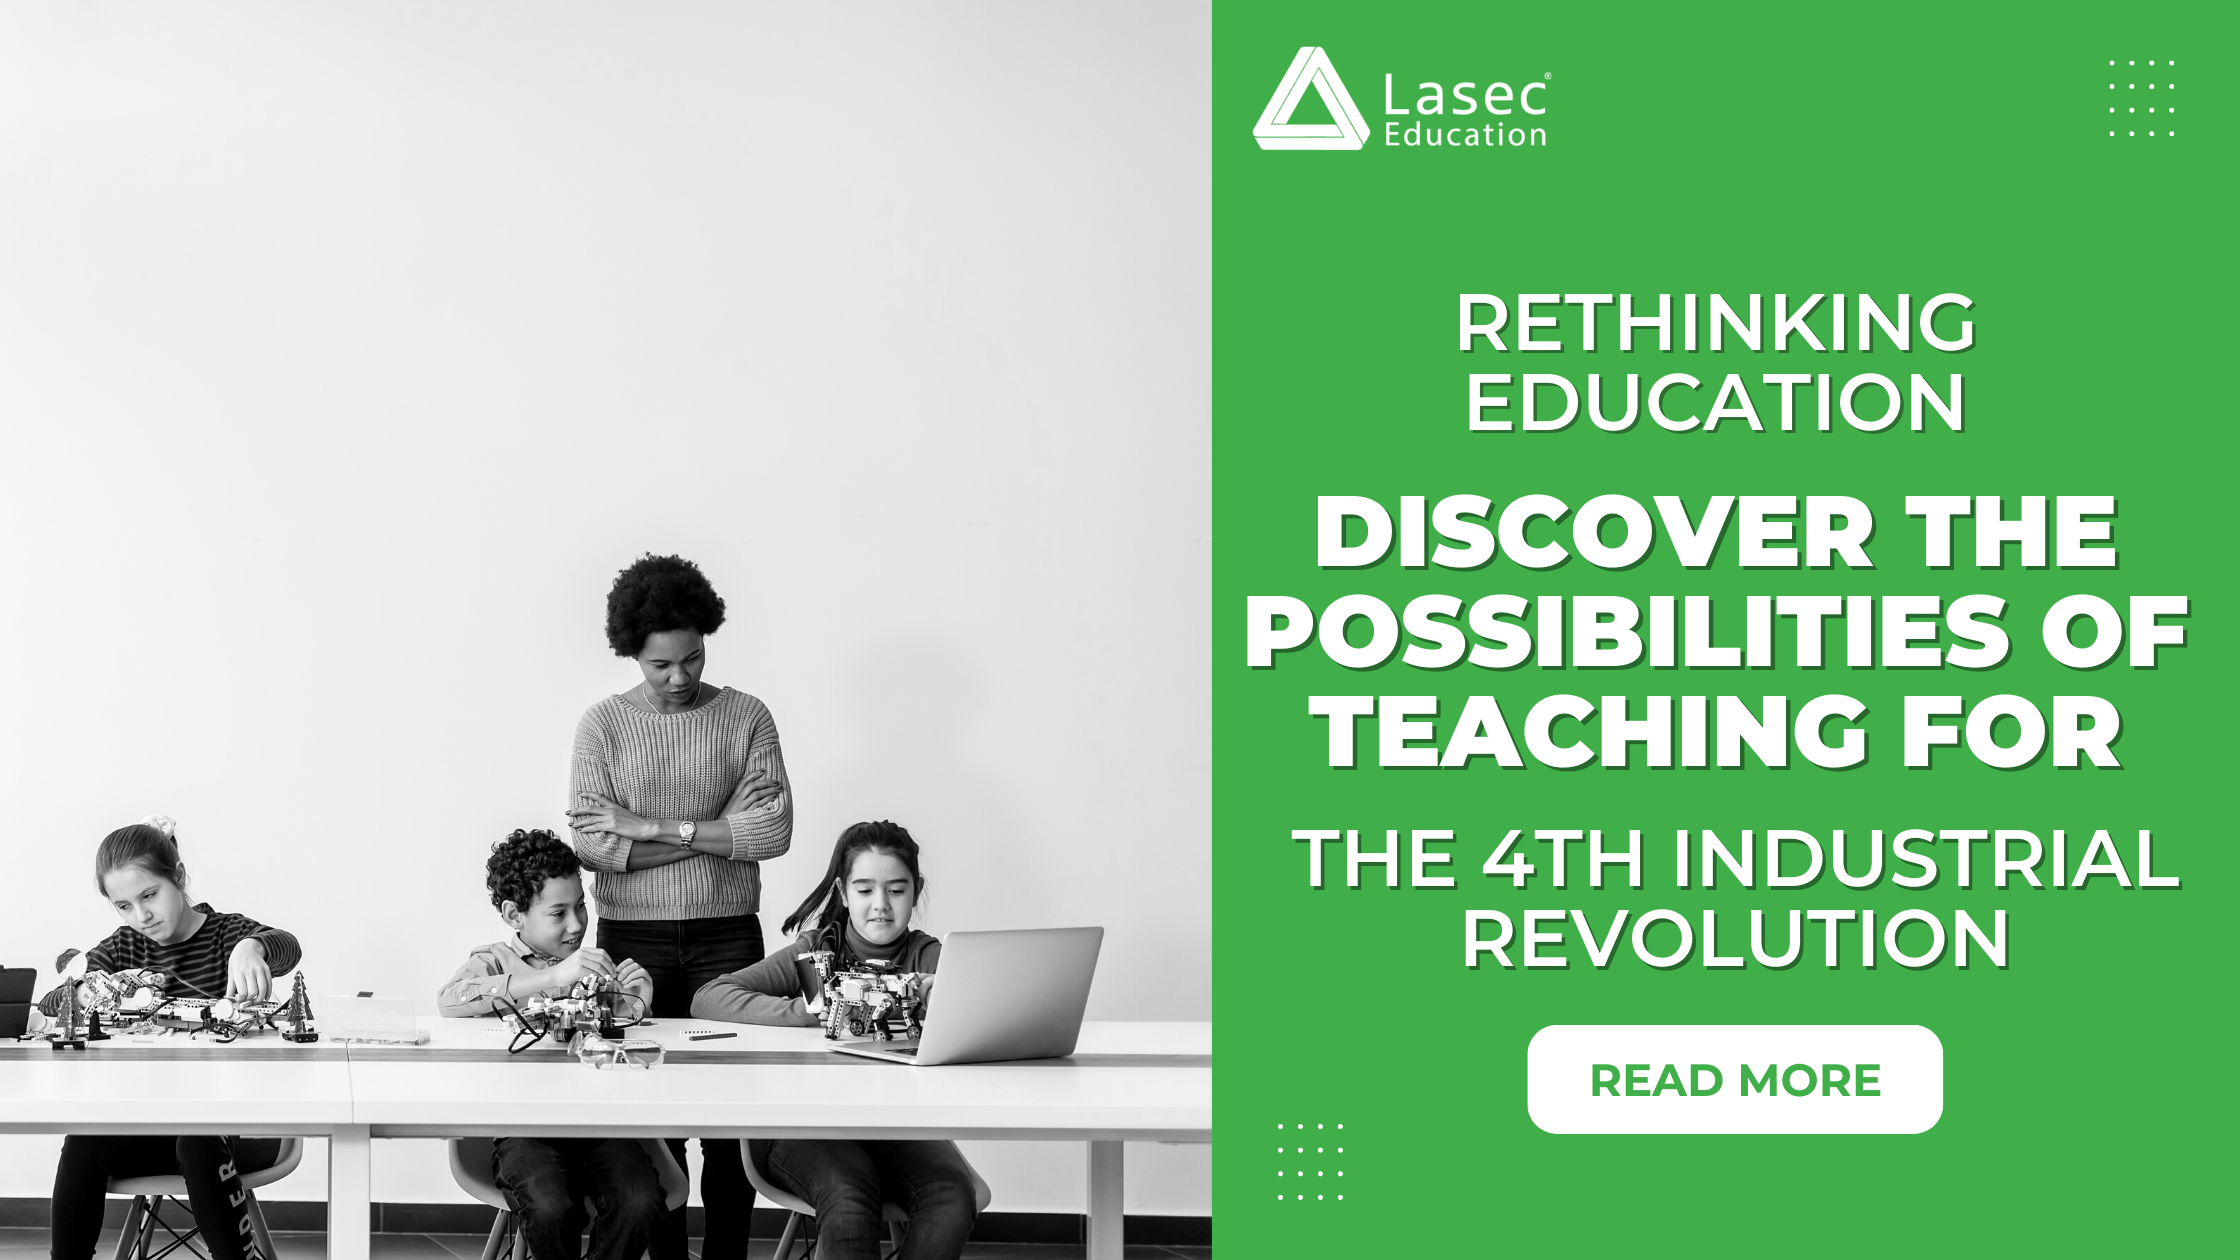 Rethinking Education - Discover the possibilities of Teaching for the 4th Industrial Revolution